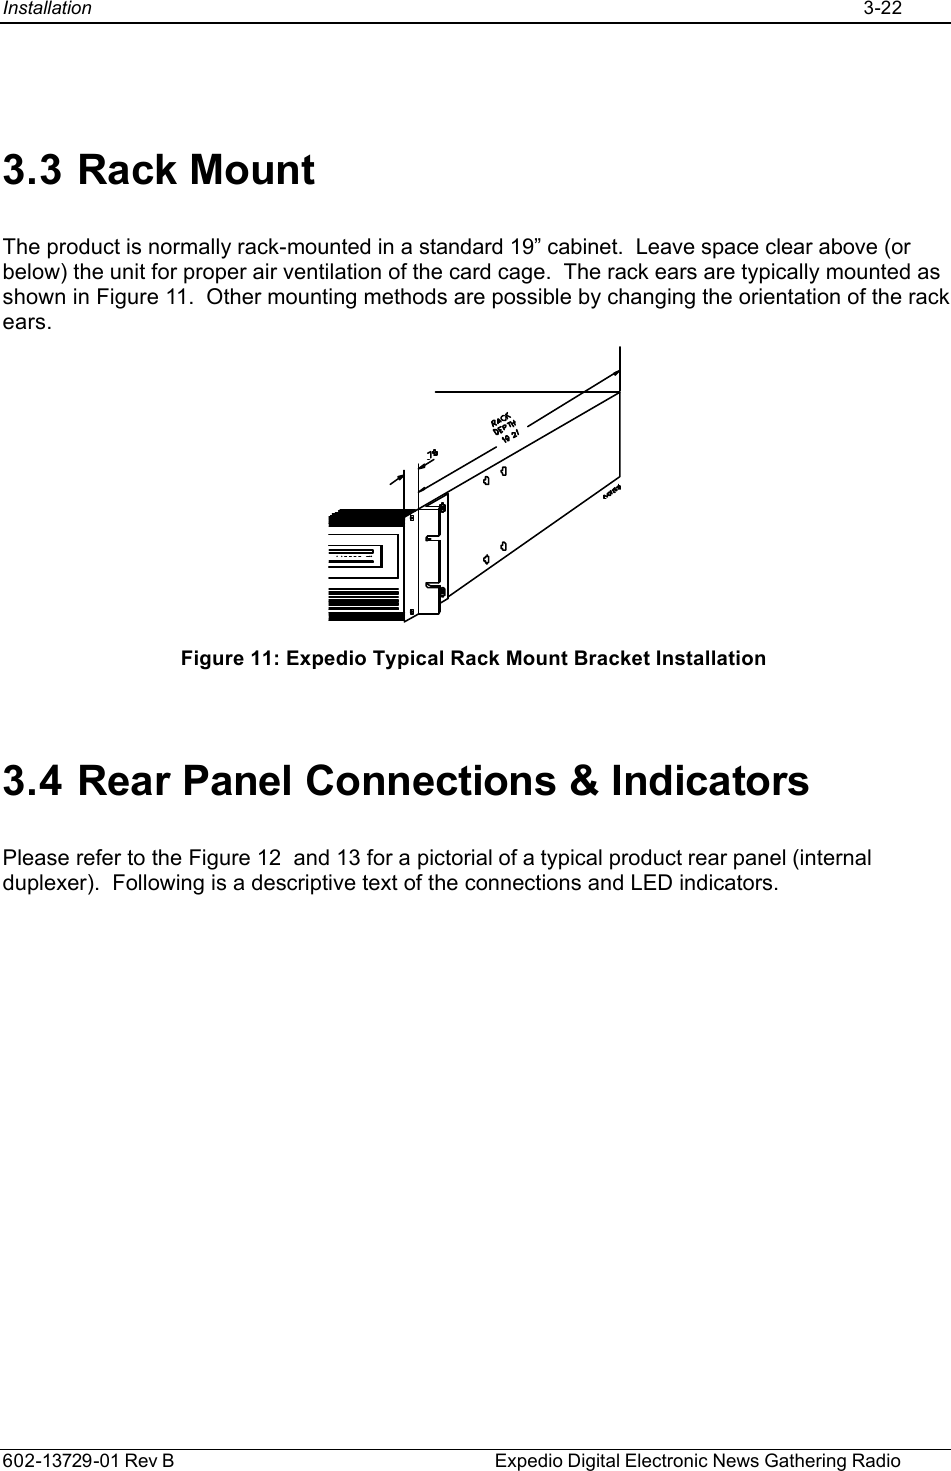 Installation    3-22  602-13729-01 Rev B    Expedio Digital Electronic News Gathering Radio  3.3 Rack Mount The product is normally rack-mounted in a standard 19” cabinet.  Leave space clear above (or below) the unit for proper air ventilation of the card cage.  The rack ears are typically mounted as shown in Figure 11.  Other mounting methods are possible by changing the orientation of the rack ears.  Figure 11: Expedio Typical Rack Mount Bracket Installation  3.4 Rear Panel Connections &amp; Indicators Please refer to the Figure 12  and 13 for a pictorial of a typical product rear panel (internal duplexer).  Following is a descriptive text of the connections and LED indicators.  